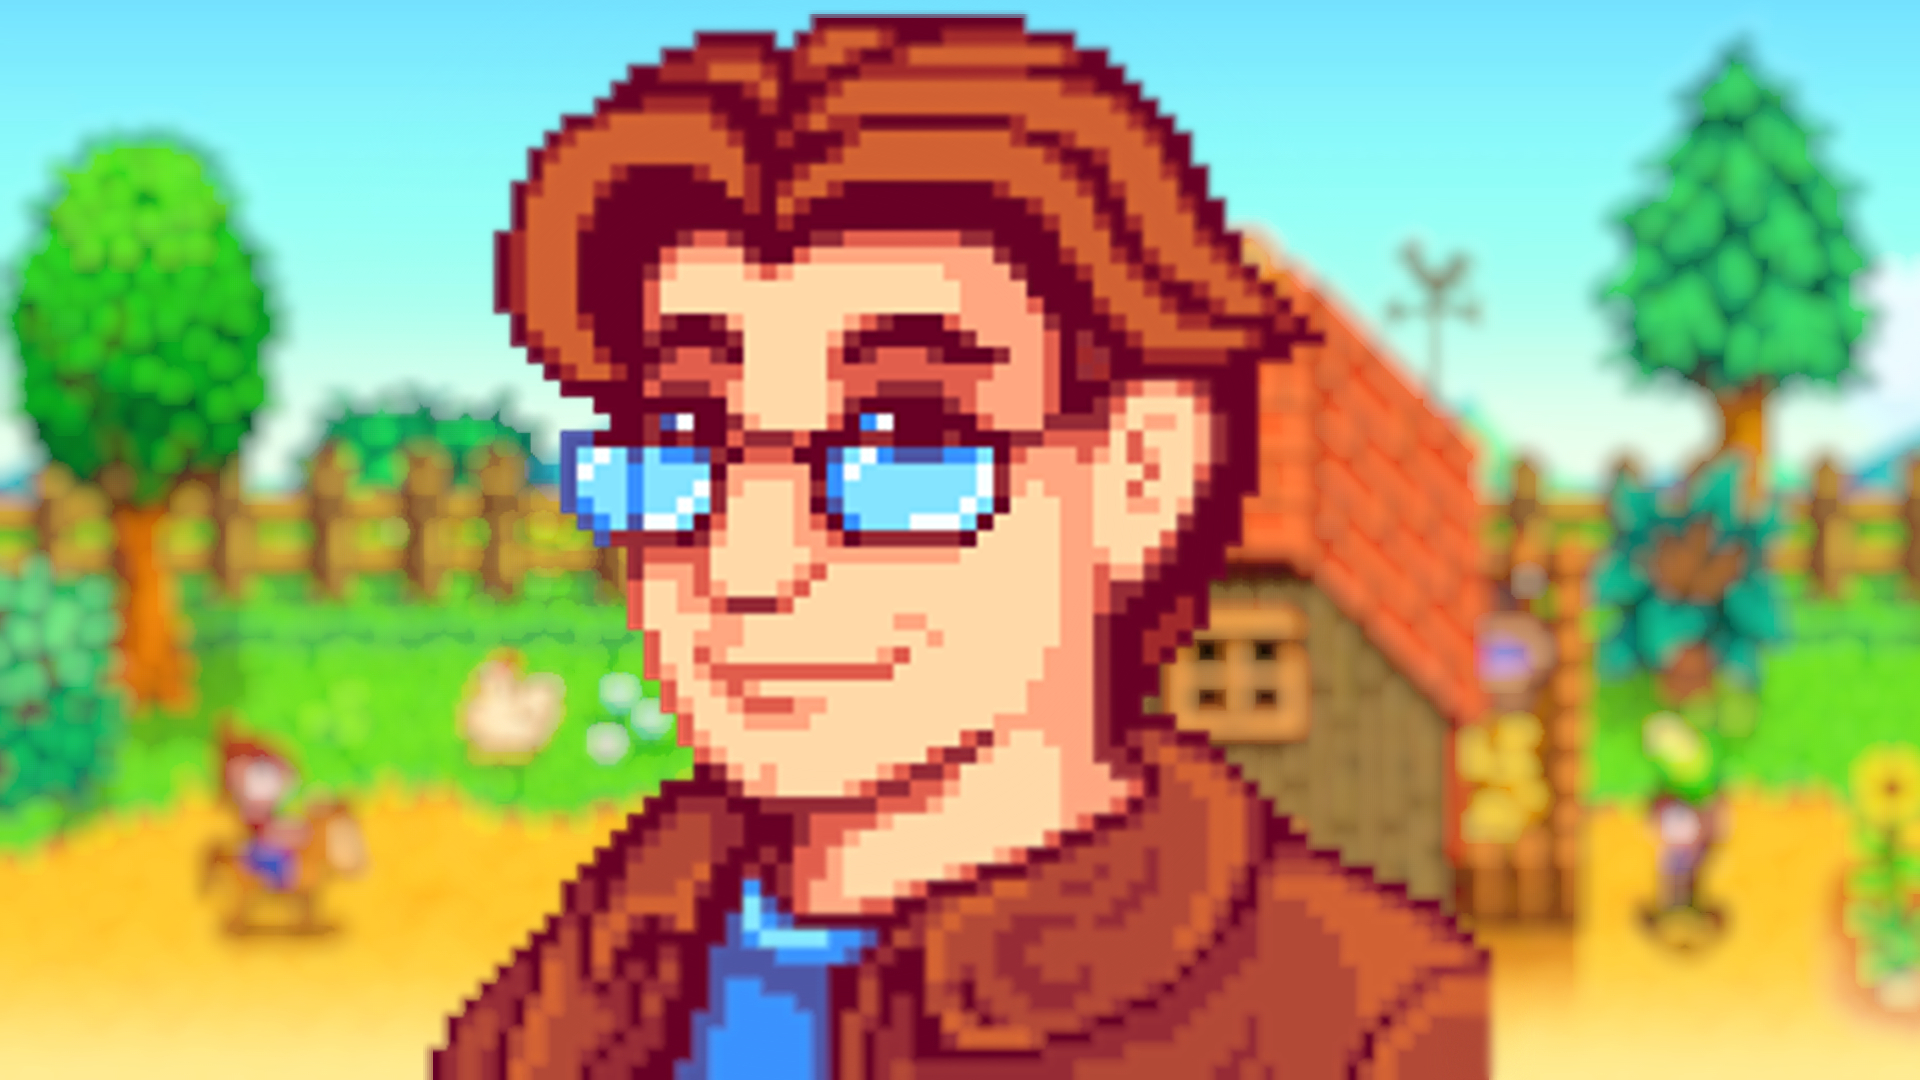 stardew-valley-1-6-update-adds-more-new-content-than-i-expected